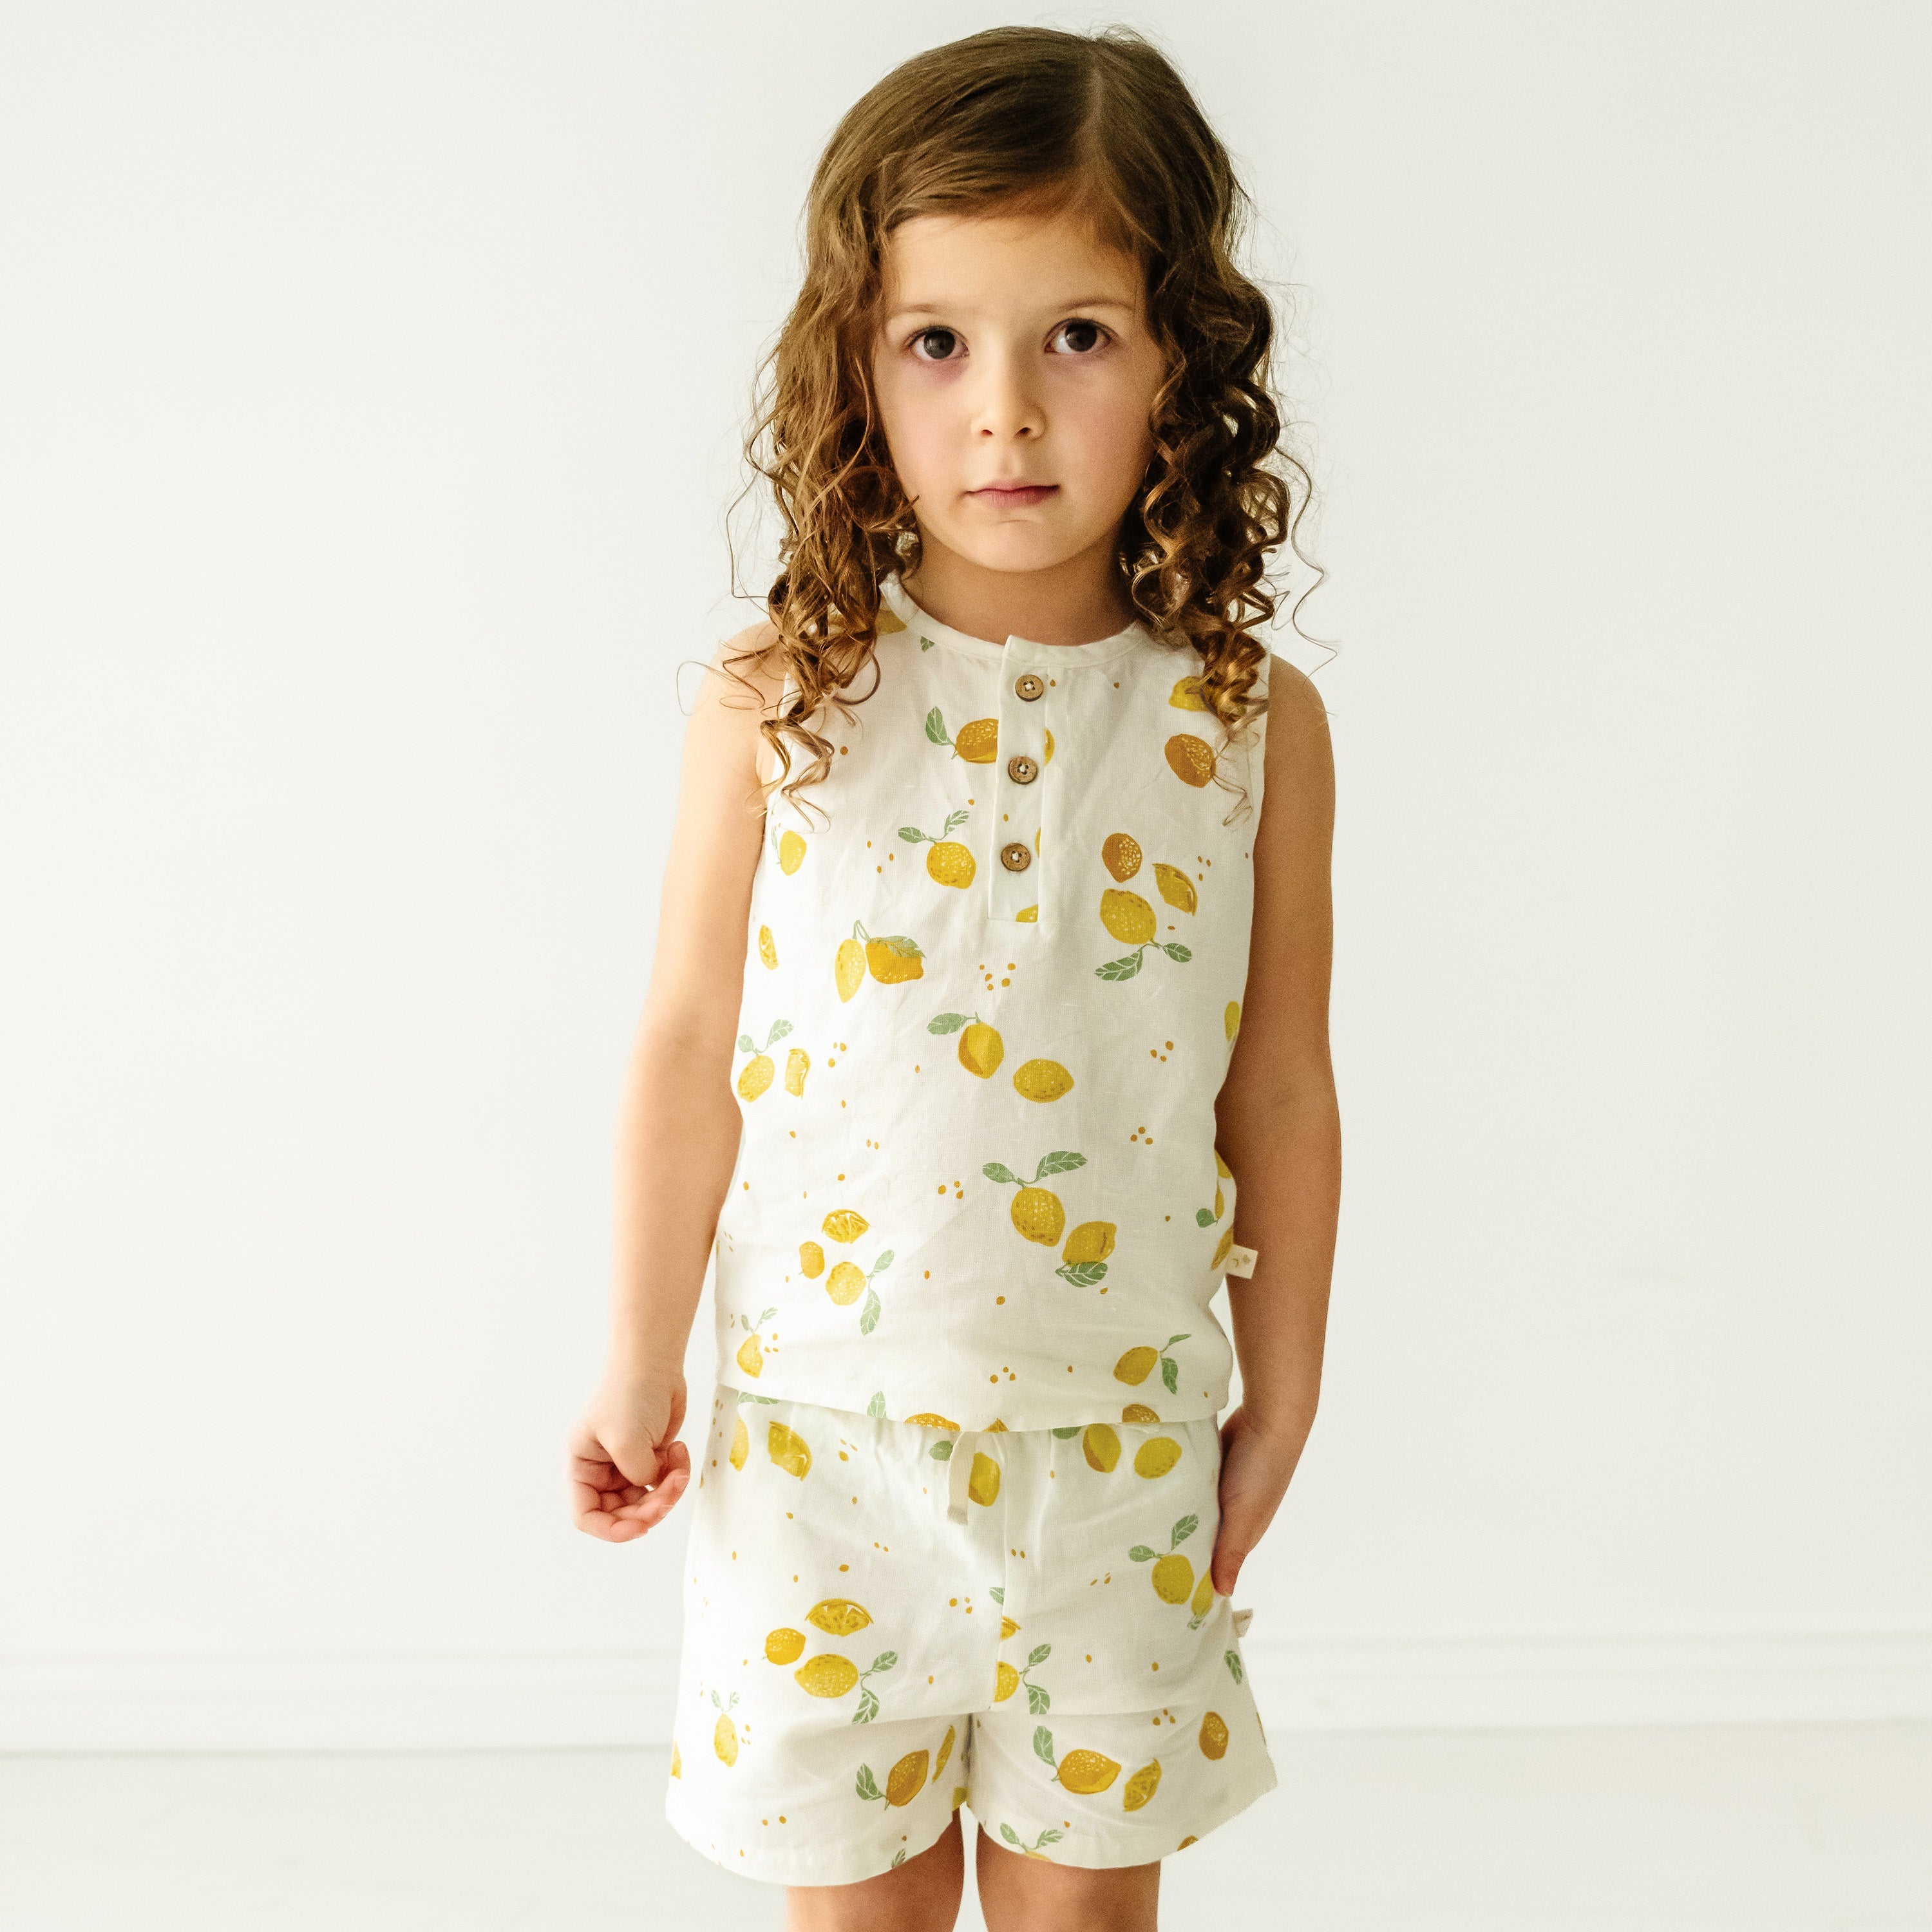 A young girl with curly hair stands facing the camera, wearing a white sleeveless Makemake Organics tank top and shorts decorated with yellow fruit prints, against a plain white background.